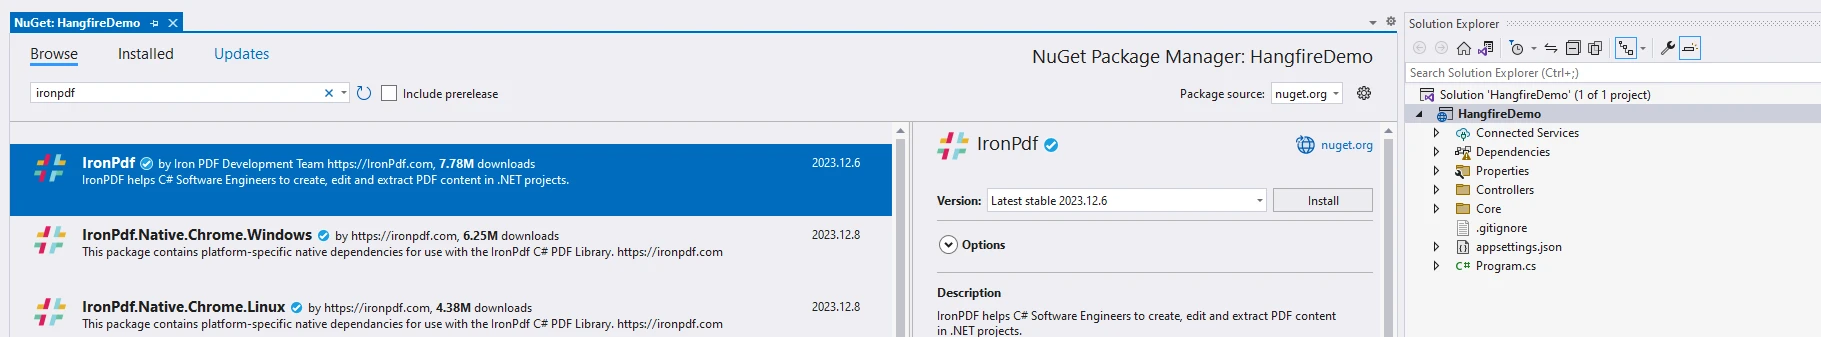 C# Orderby (How It Works For Developers): Figure 2 - Installing IronPDF through the NuGet Package Manager